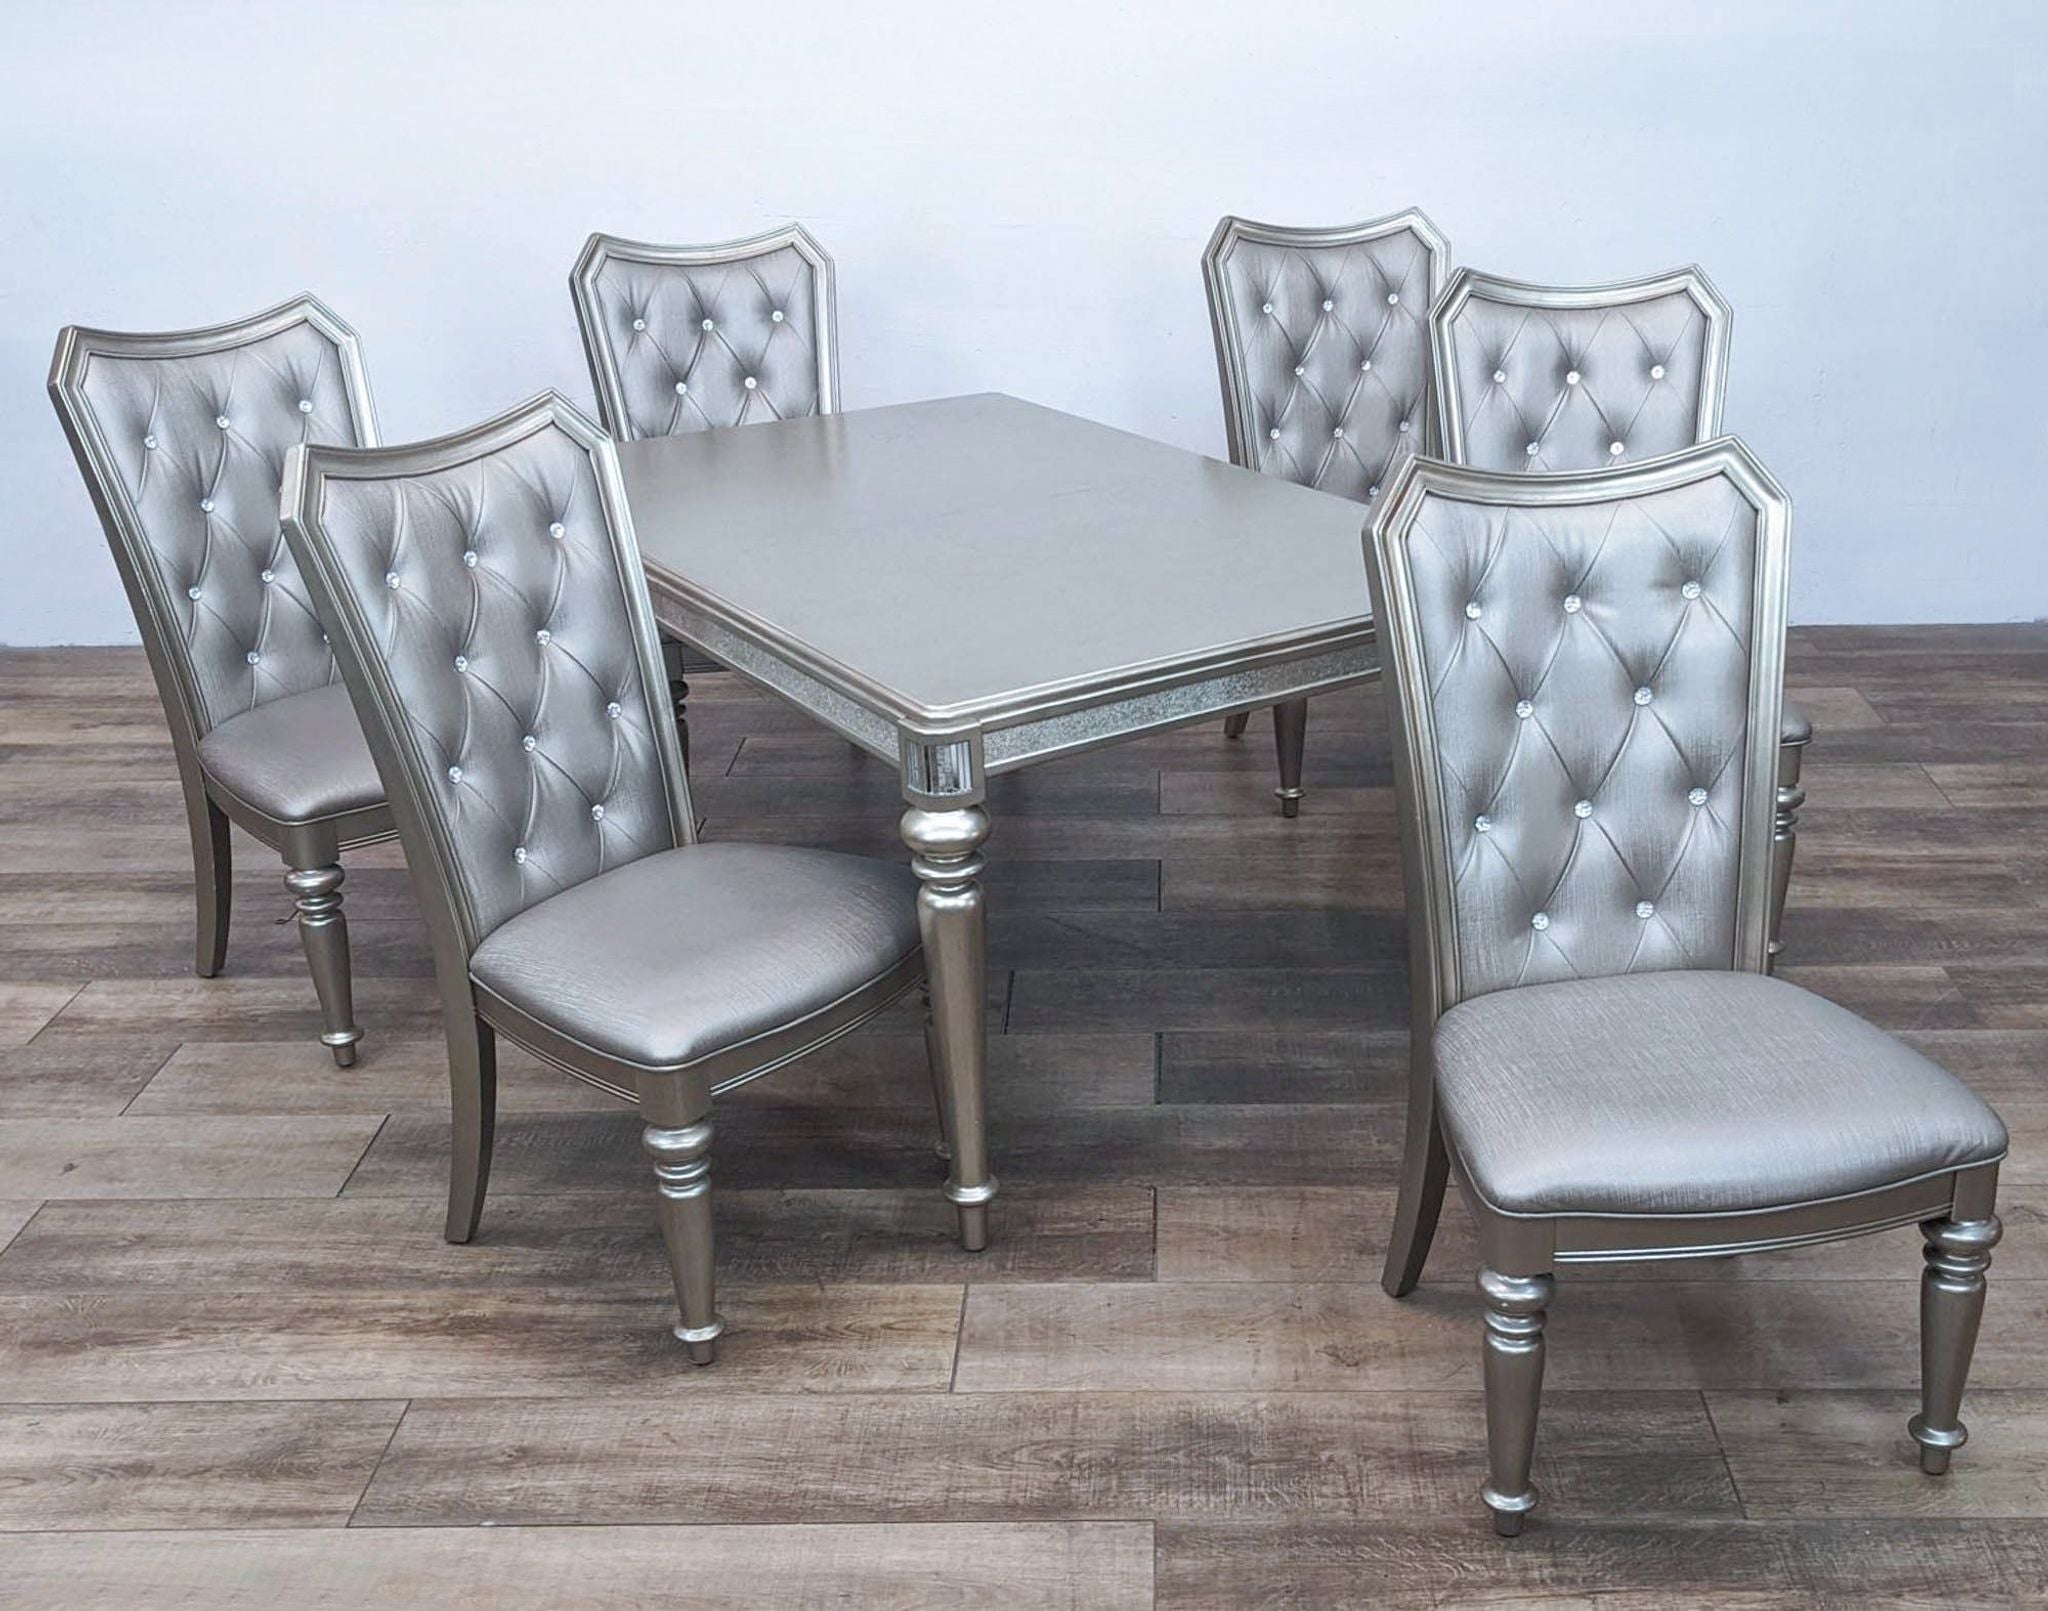 Alt text 1: Coaster 7-piece Danette dining set with a metallic platinum finish, mirrors, tufted chairs with crystal buttons, and faux leather.